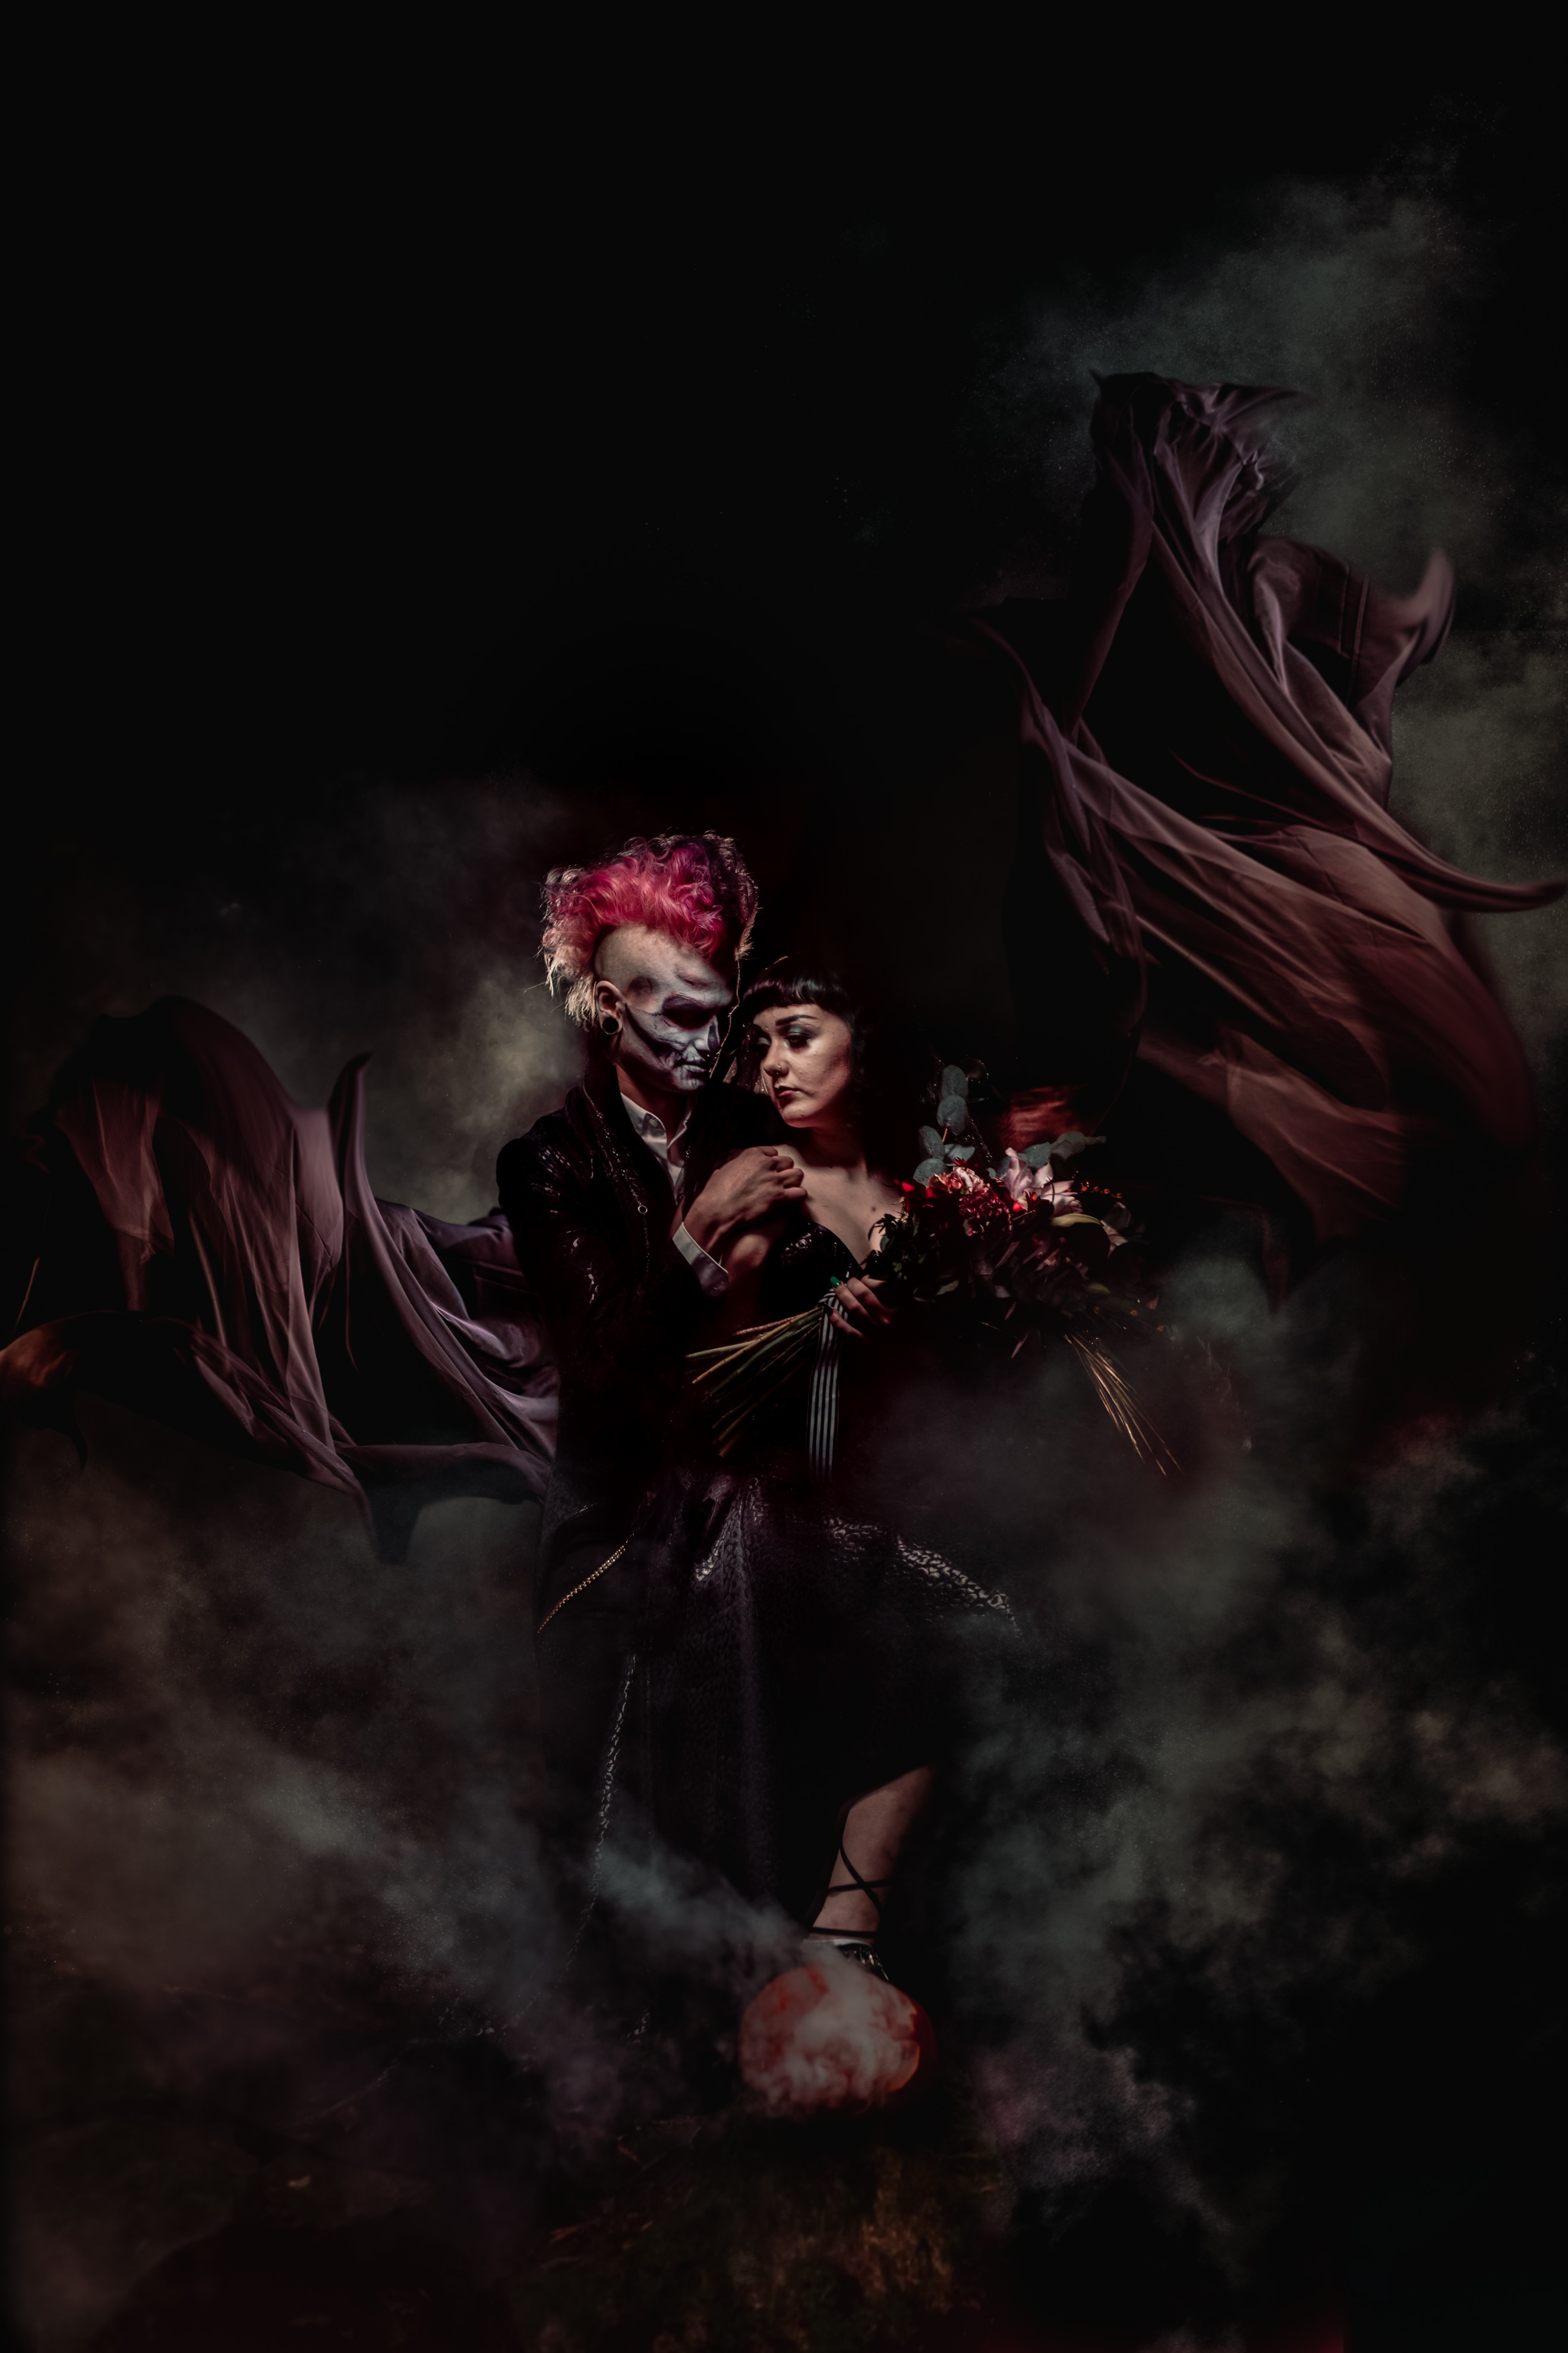 dramatic photo of halloween wedding couple surrounded by black veils swirling in the wind - groom with dramatic pink mohawk and painted face - alternative bride hold bold wedding bouquet